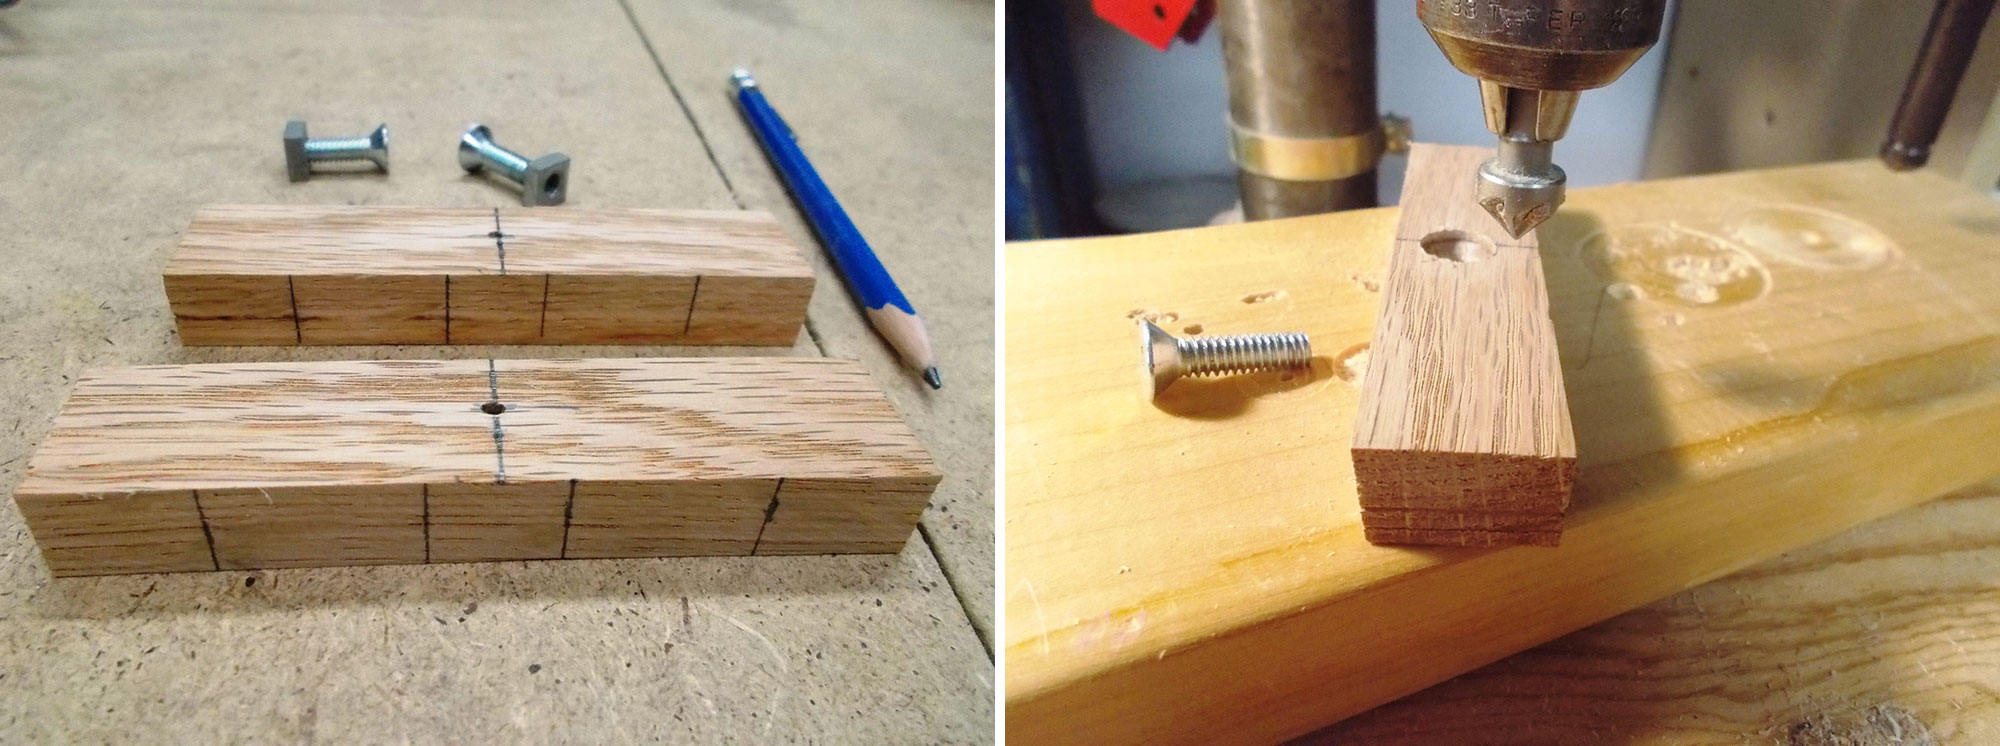 Image left: Two hardwood blocks, two bolts and one pencil on man-made board. Image right: Drilling countersink hole in hardwood block.